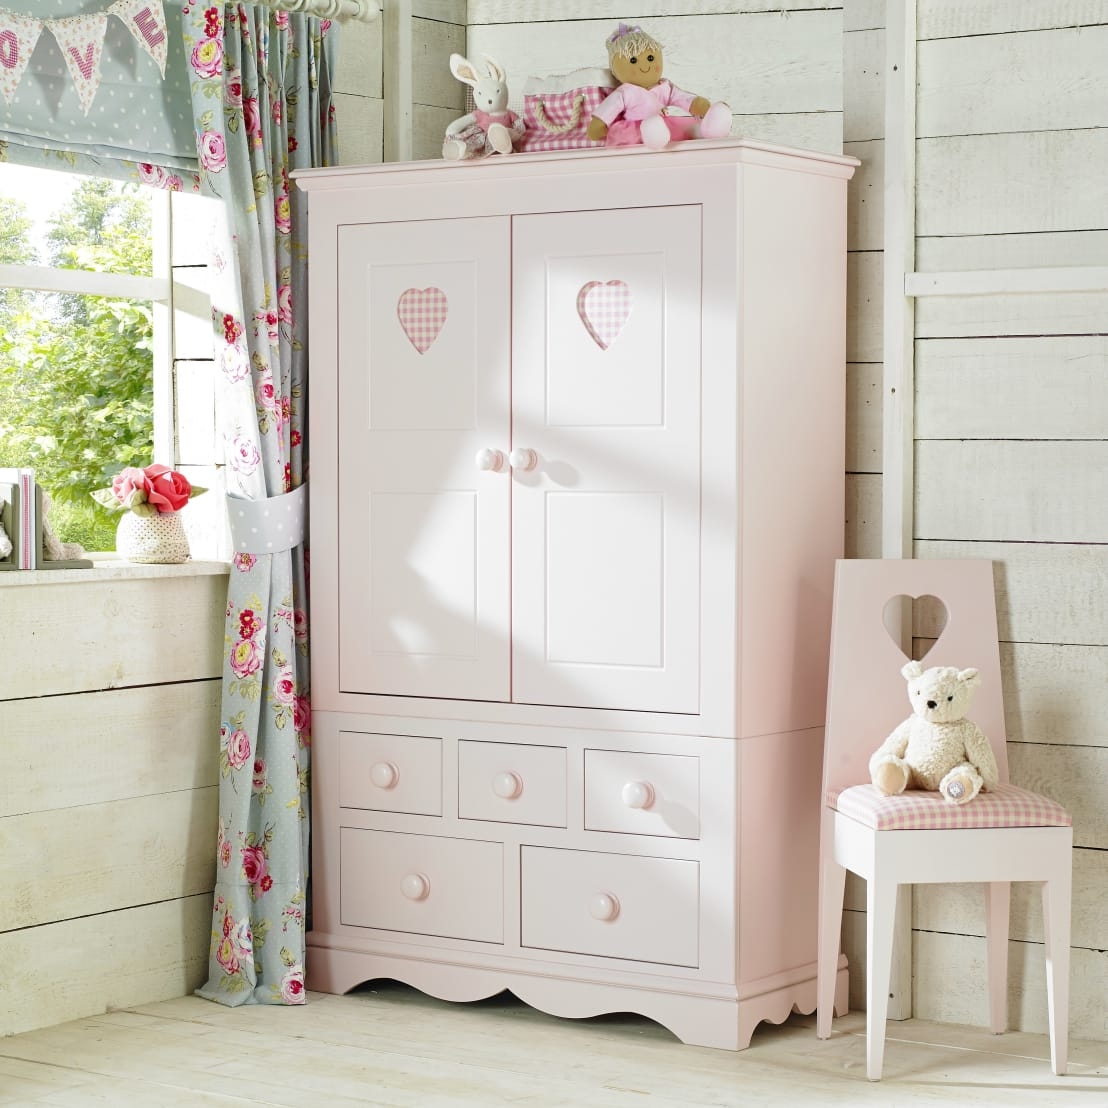 childrens wardrobes with drawers